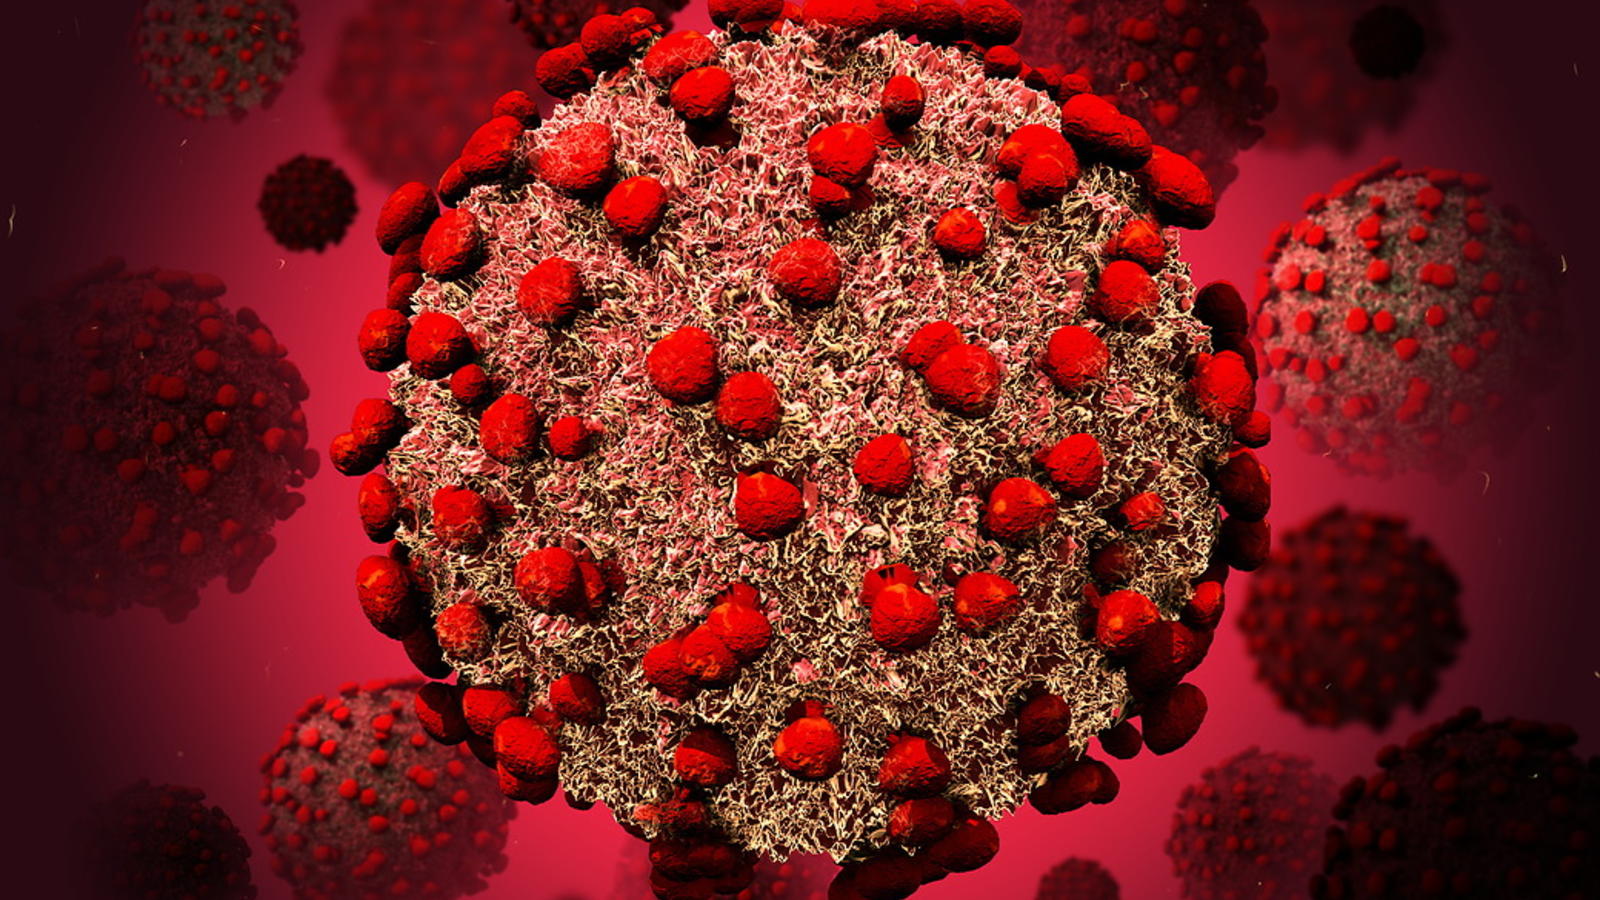 A render of the Covid-19 virus